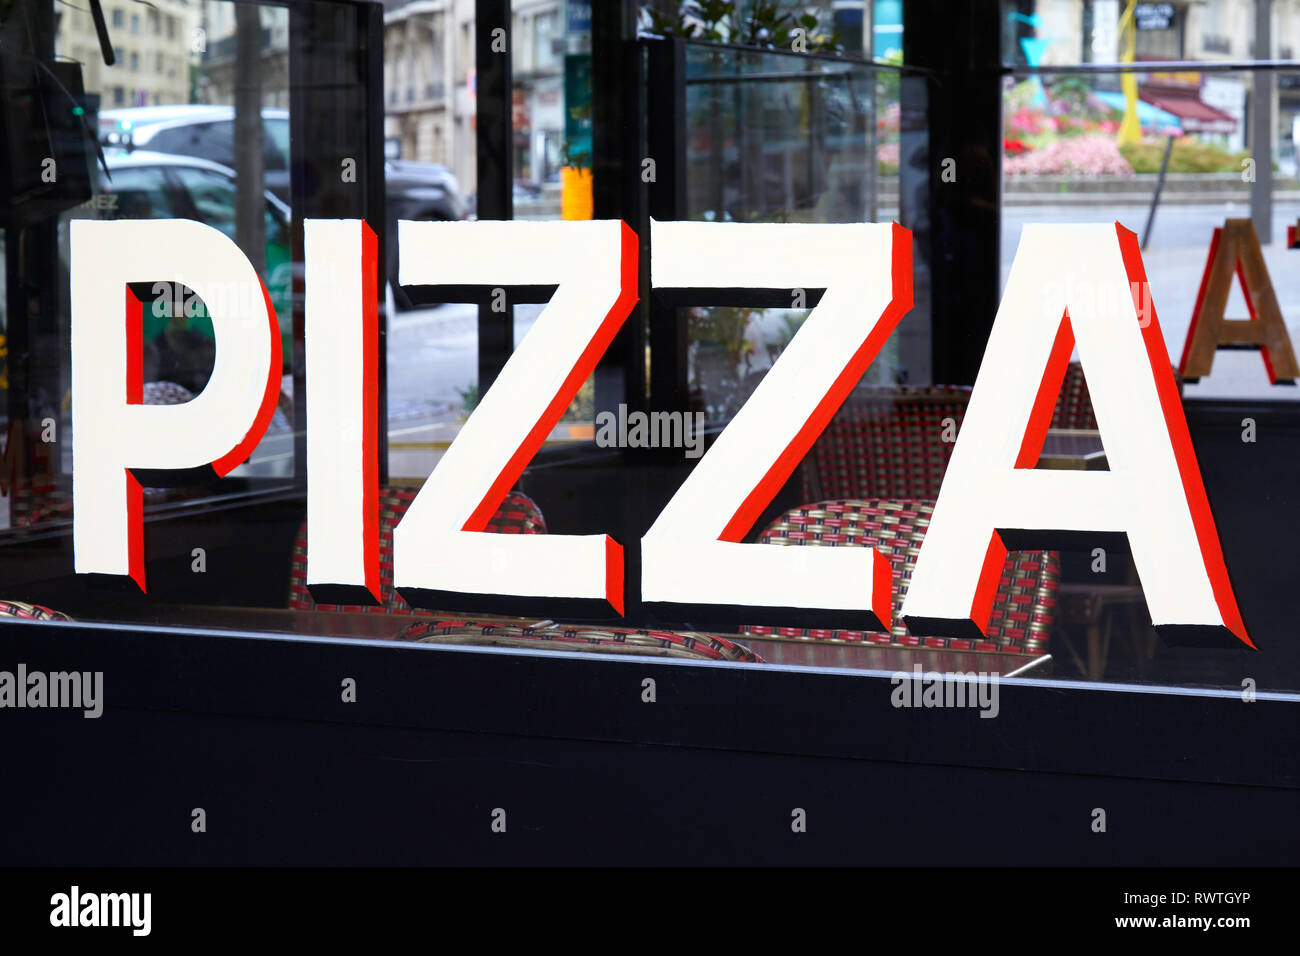 Pizza sign in white, black and red letters on restaurant glass in Italy Stock Photo